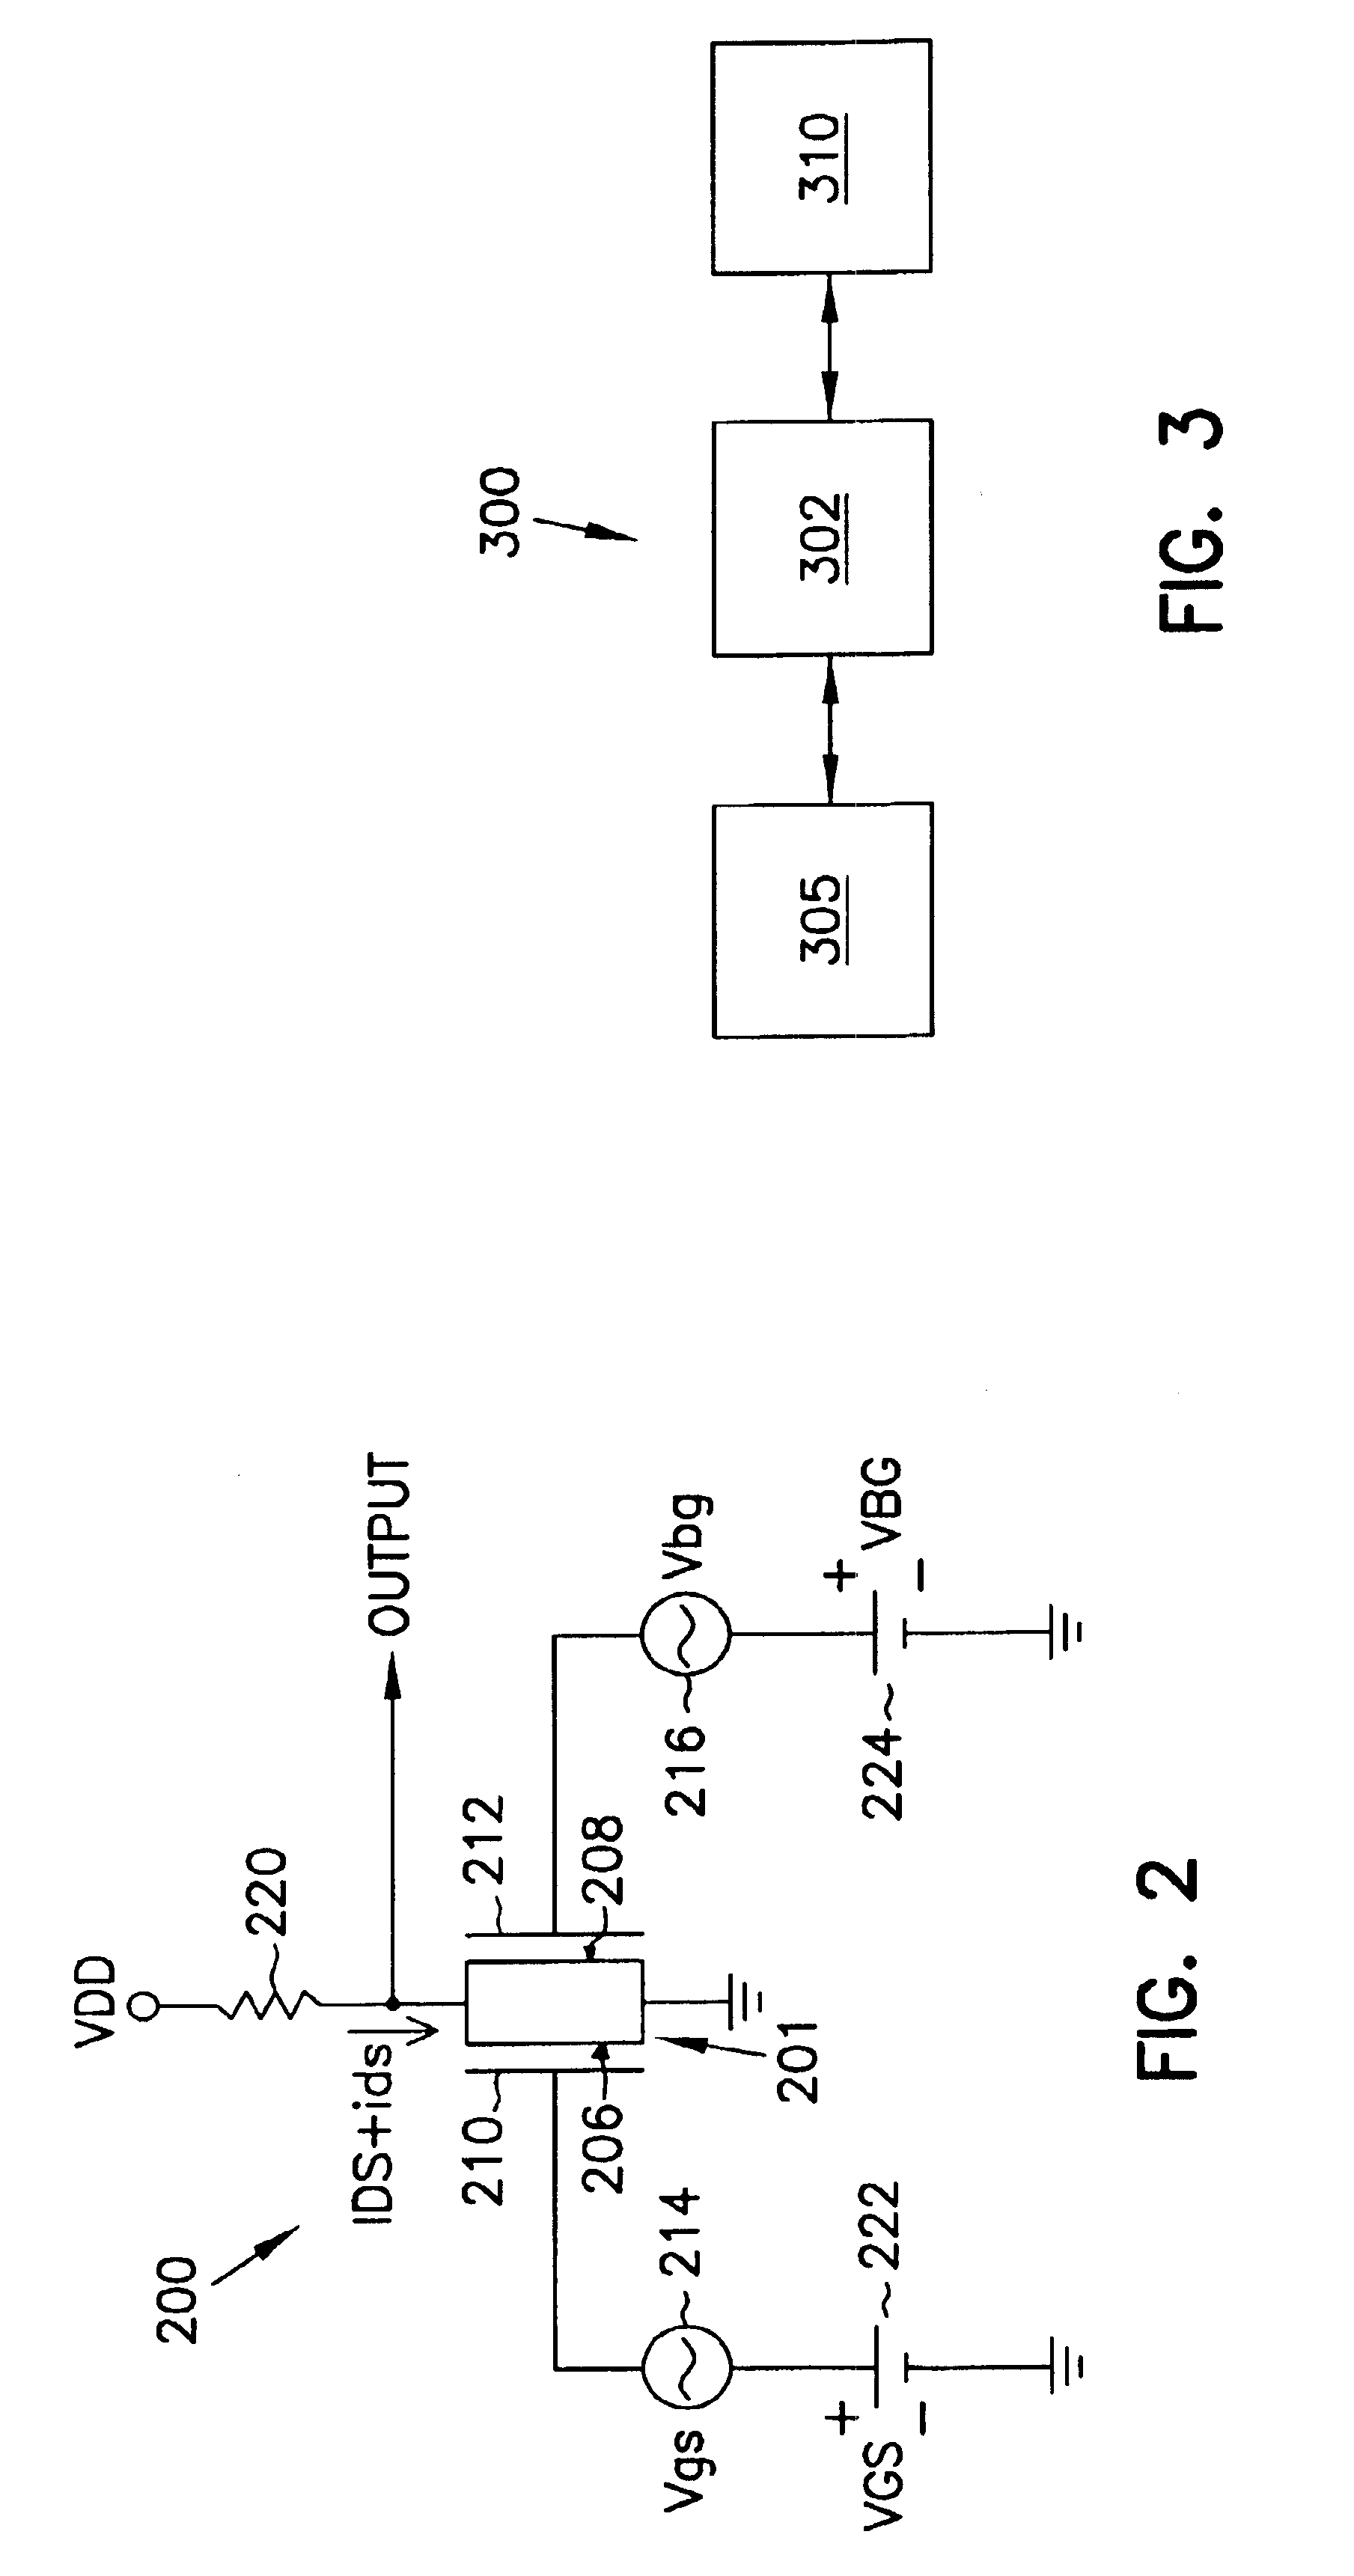 Method of fabricating a transistor on a substrate to operate as a fully depleted structure